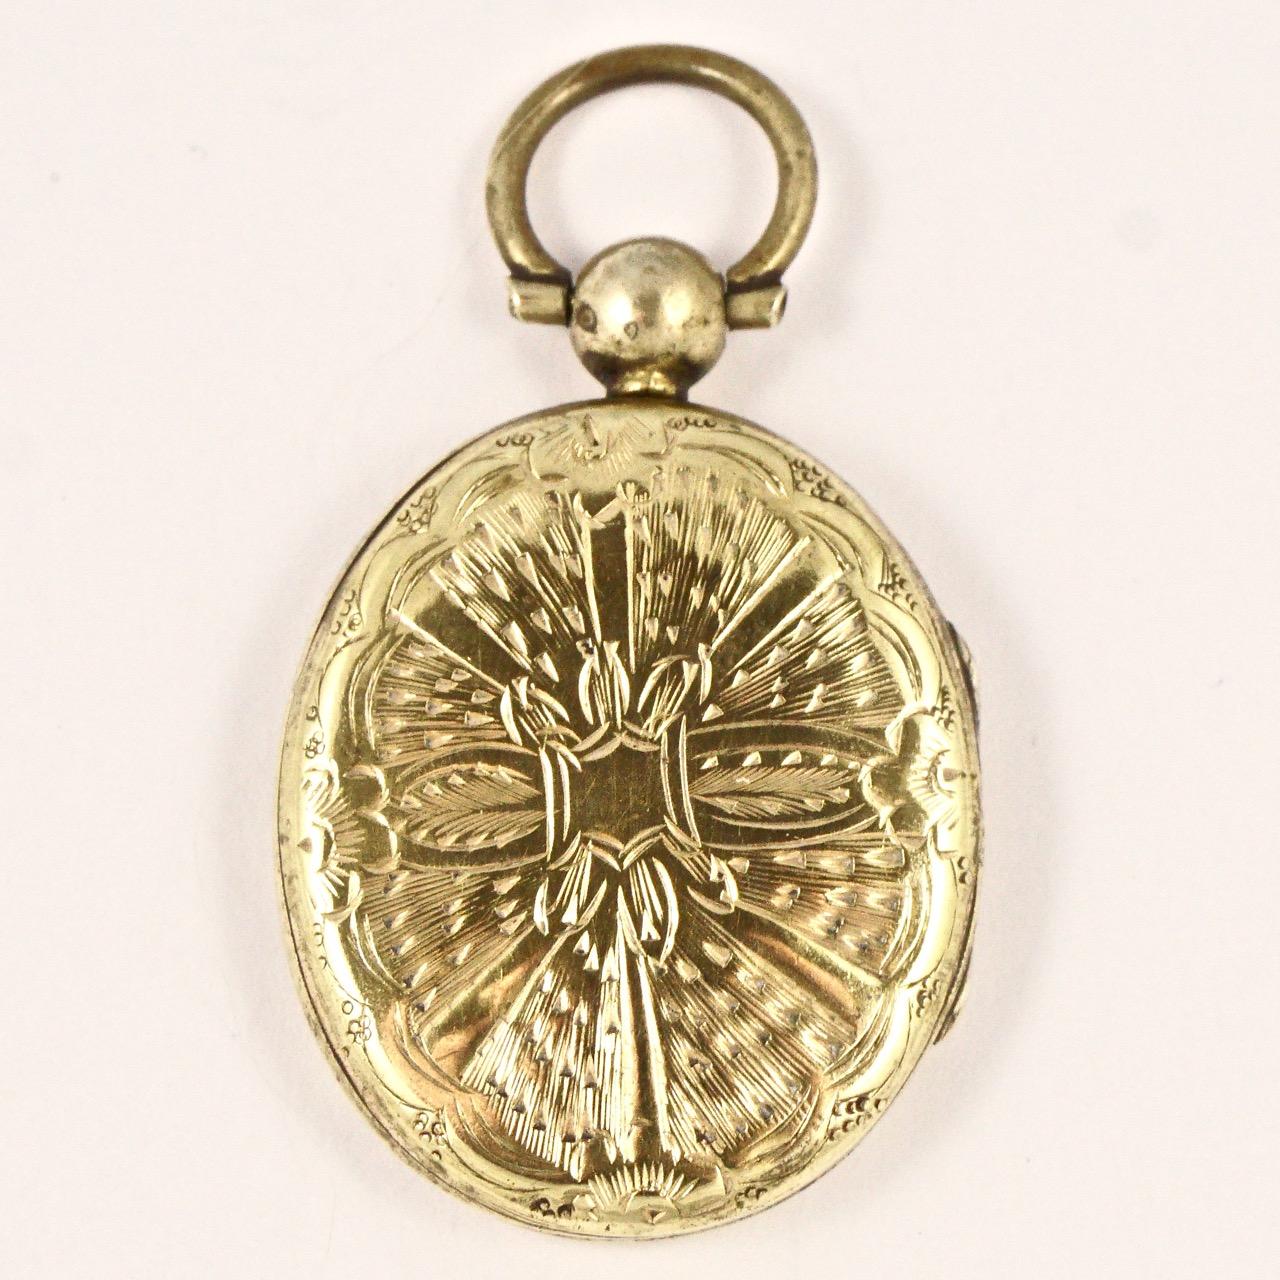 Antique Victorian gold plated locket, featuring a lovely hand engraved floral and abstract design. The oval locket measures length 3.1cm / 1.22 inches by width 2.55cm / 1 inch. The locket has scratching as expected and some wear to the gold plating.